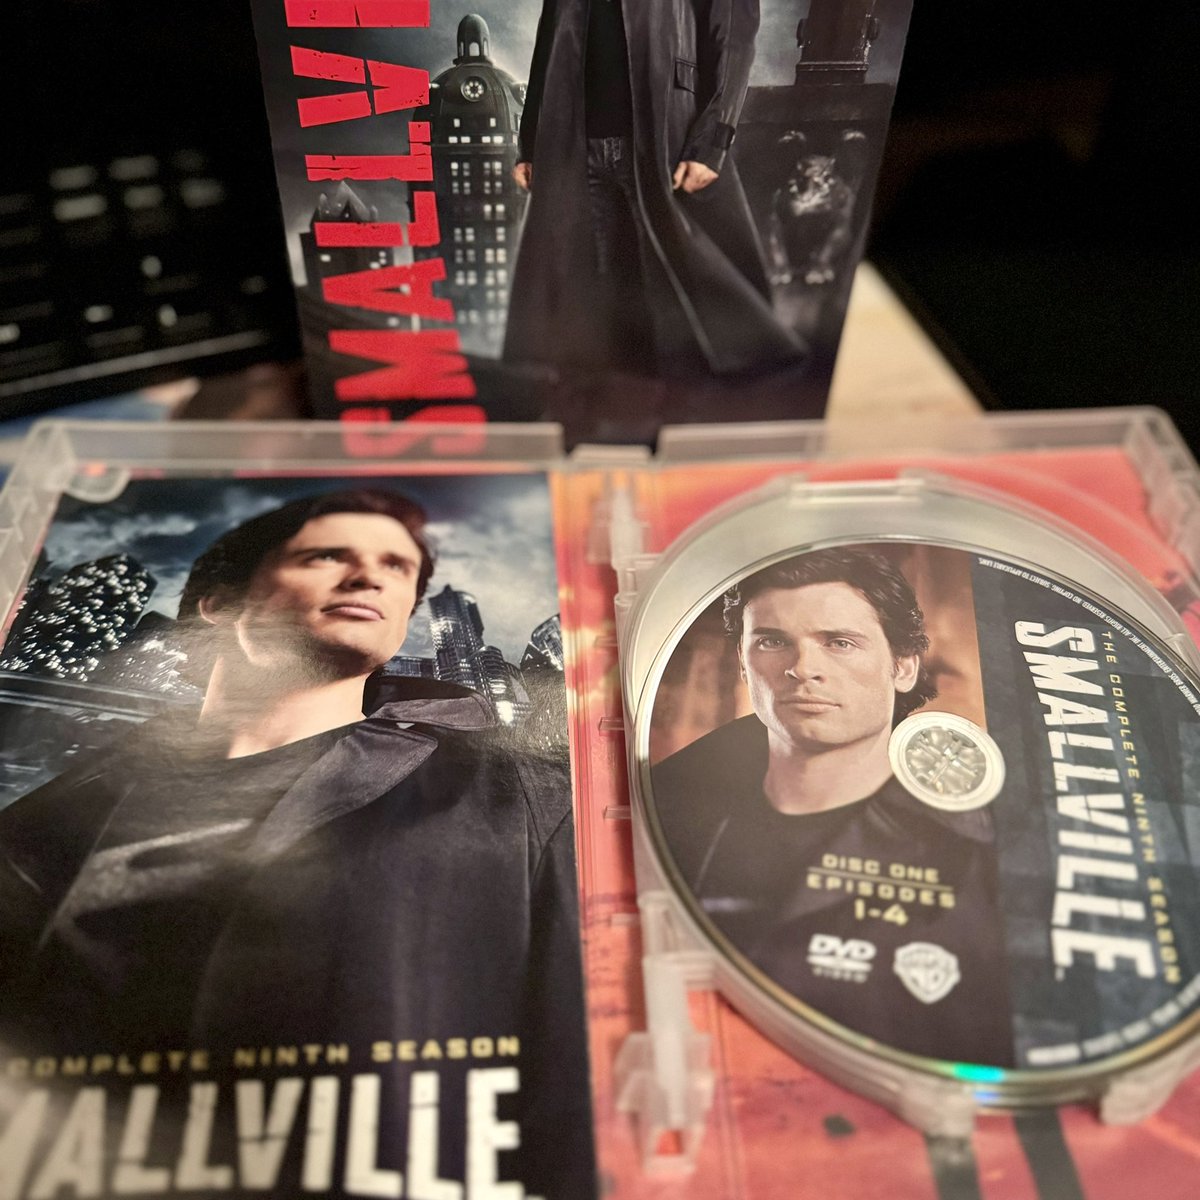 I bought season 9 of #Smallville on #BlackFriday in 2010 at #BestBuy.  It’s been sealed until today. #DVD #PhysicalMedia #SuperSaturday